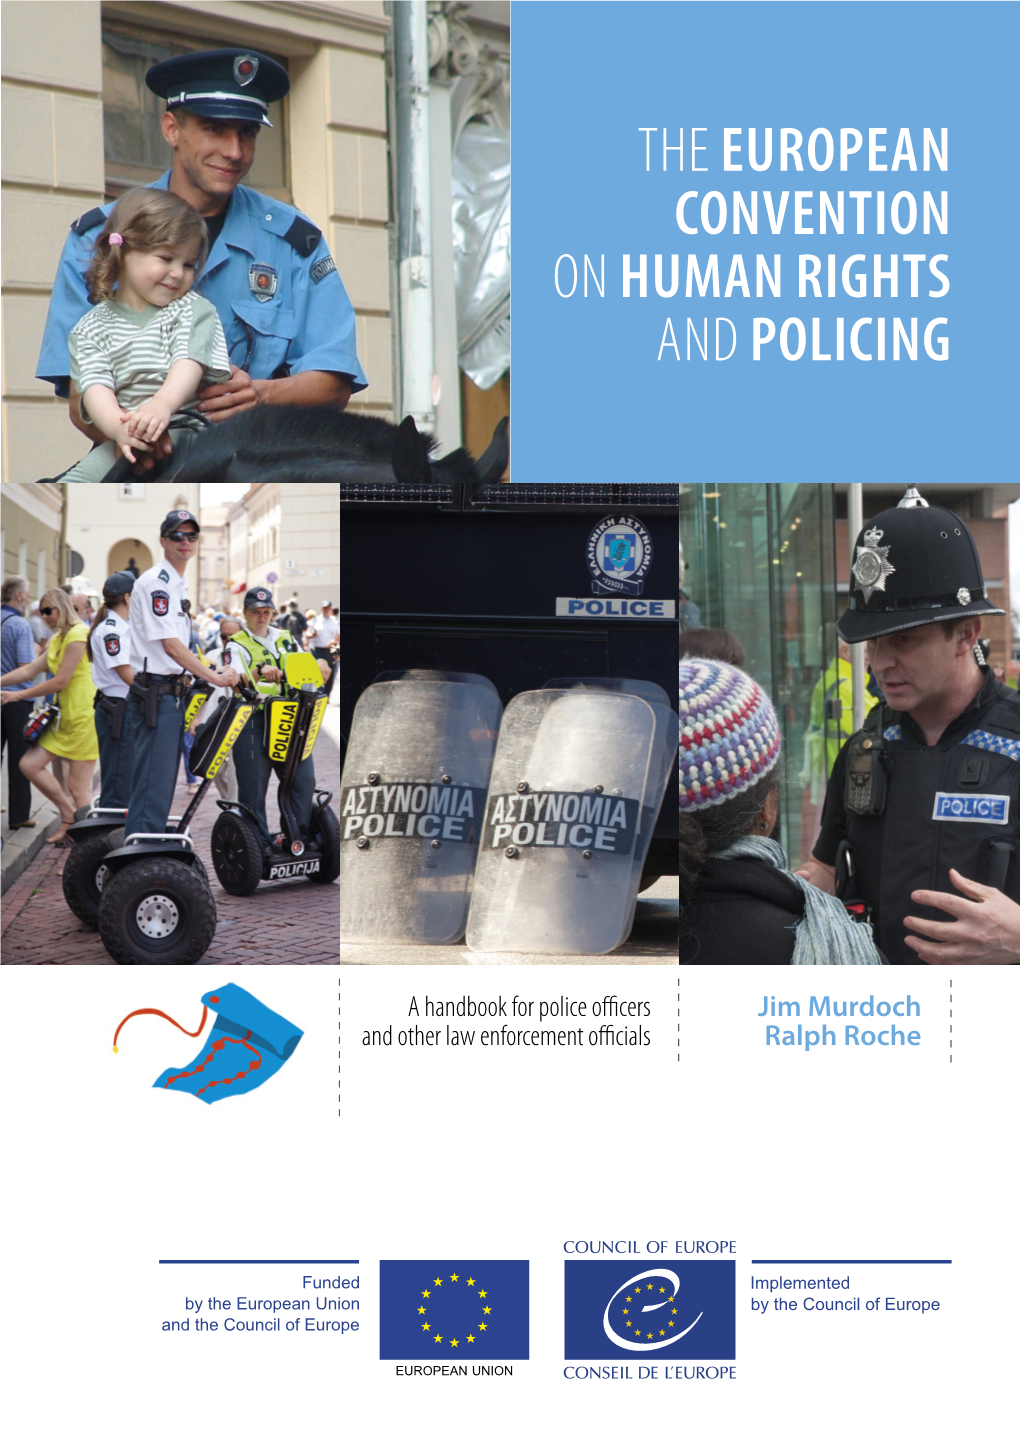 THE EUROPEAN CONVENTION on HUMAN RIGHTS and POLICING He European Convention on Human Rights and Policing Convention He European T